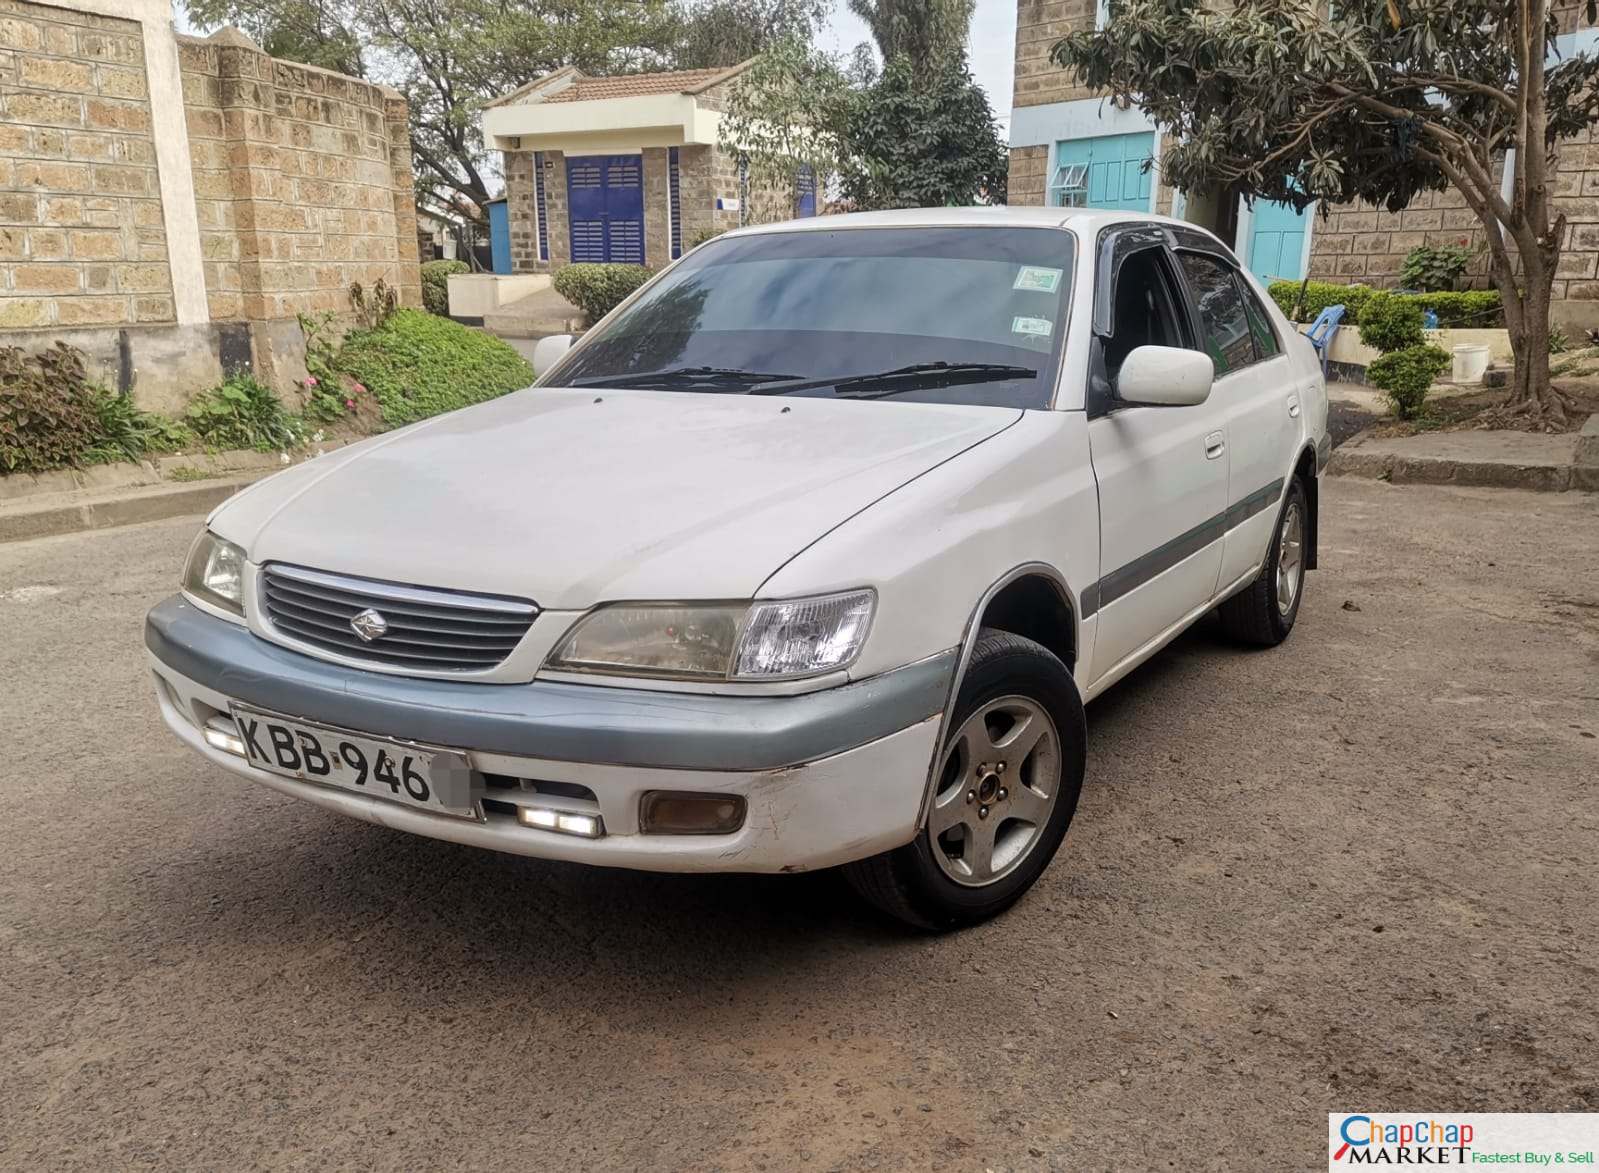 Cars Cars For Sale-Toyota Premio nyoka QUICK SALE You pay 20% Deposit Trade in Ok Premio for sale in kenya hire purchase installments EXCLUSIVE 9